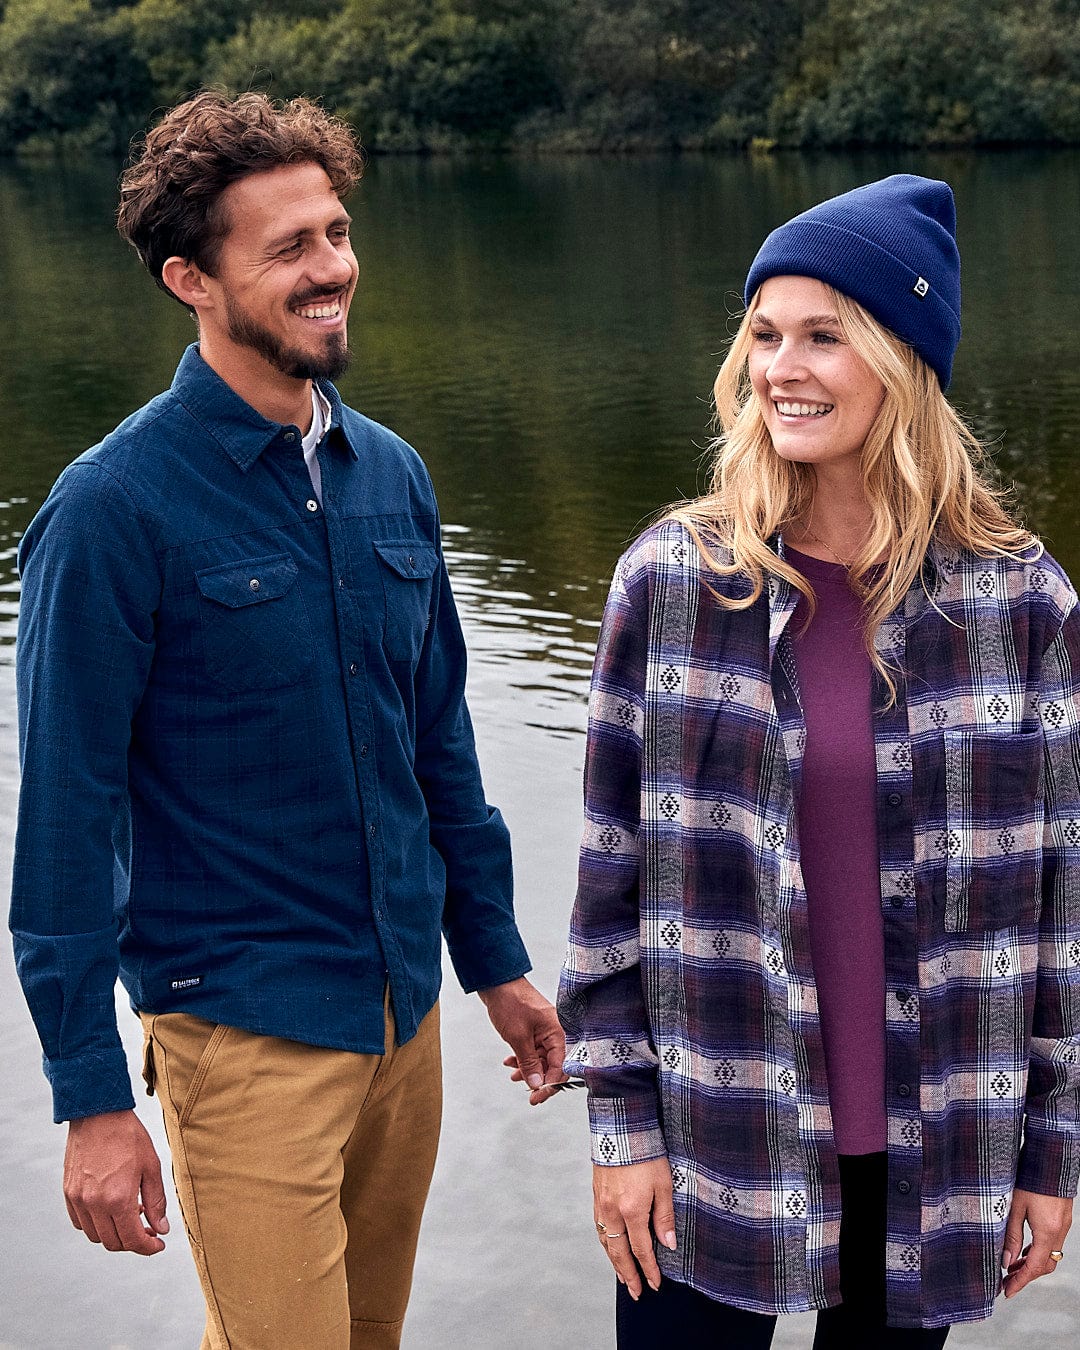 A man and woman standing next to a body of water, wearing the Saltrock Ok - Tight Knit Beanie in Dark Blue.